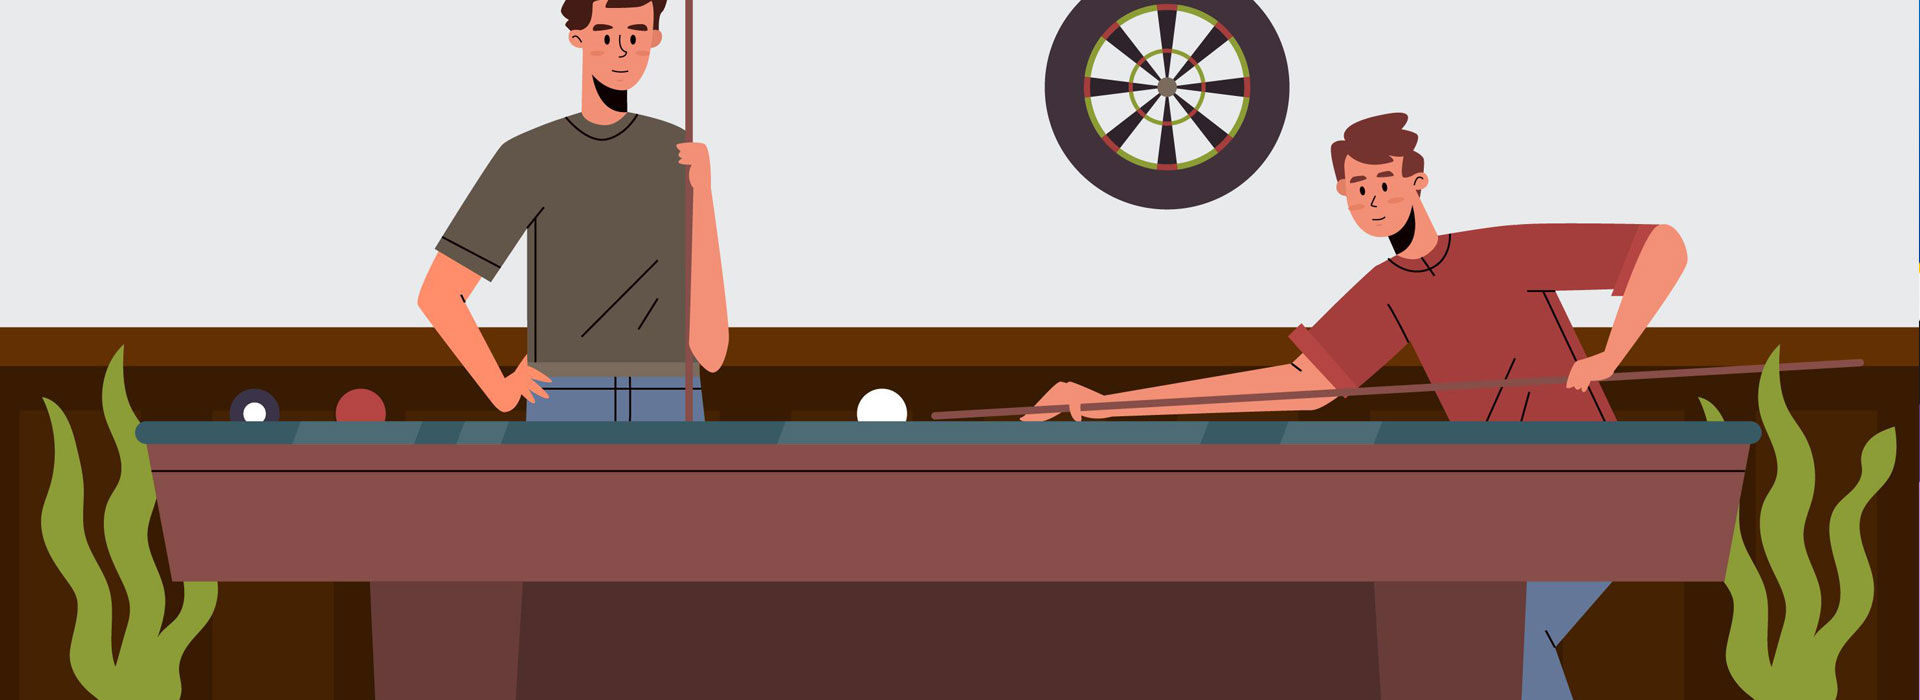 pool-table-removal-service